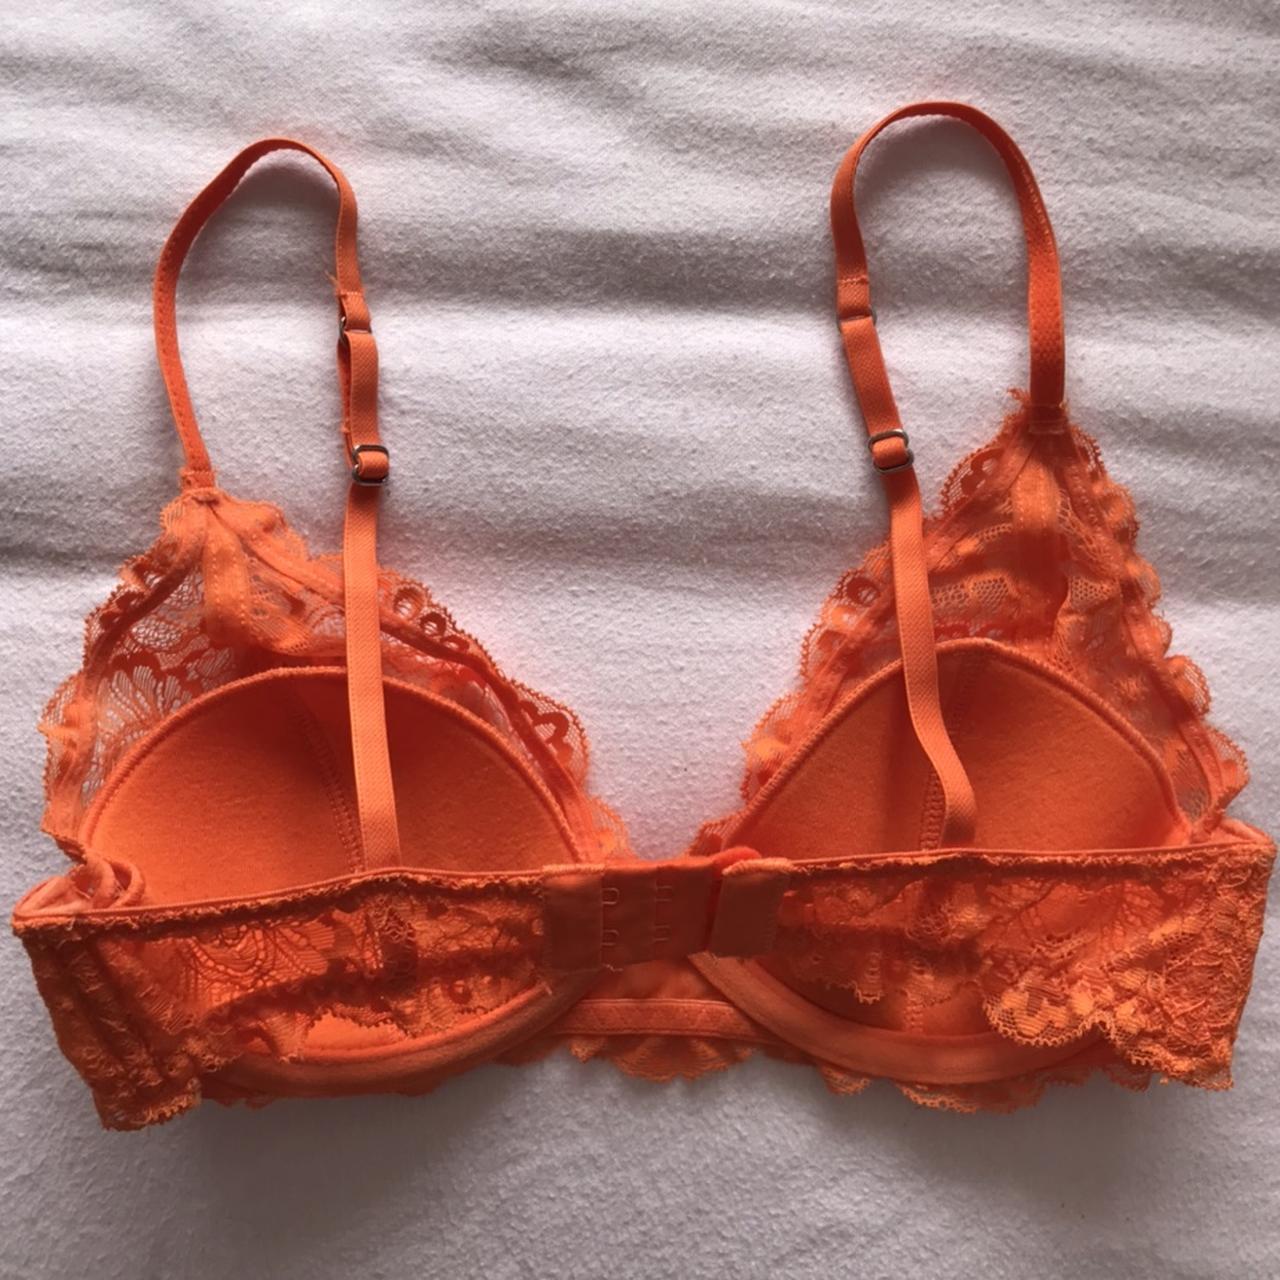 Victoria's Secret Padded Bra Orange Lace No size tag. 34C - $13 - From  Hannah